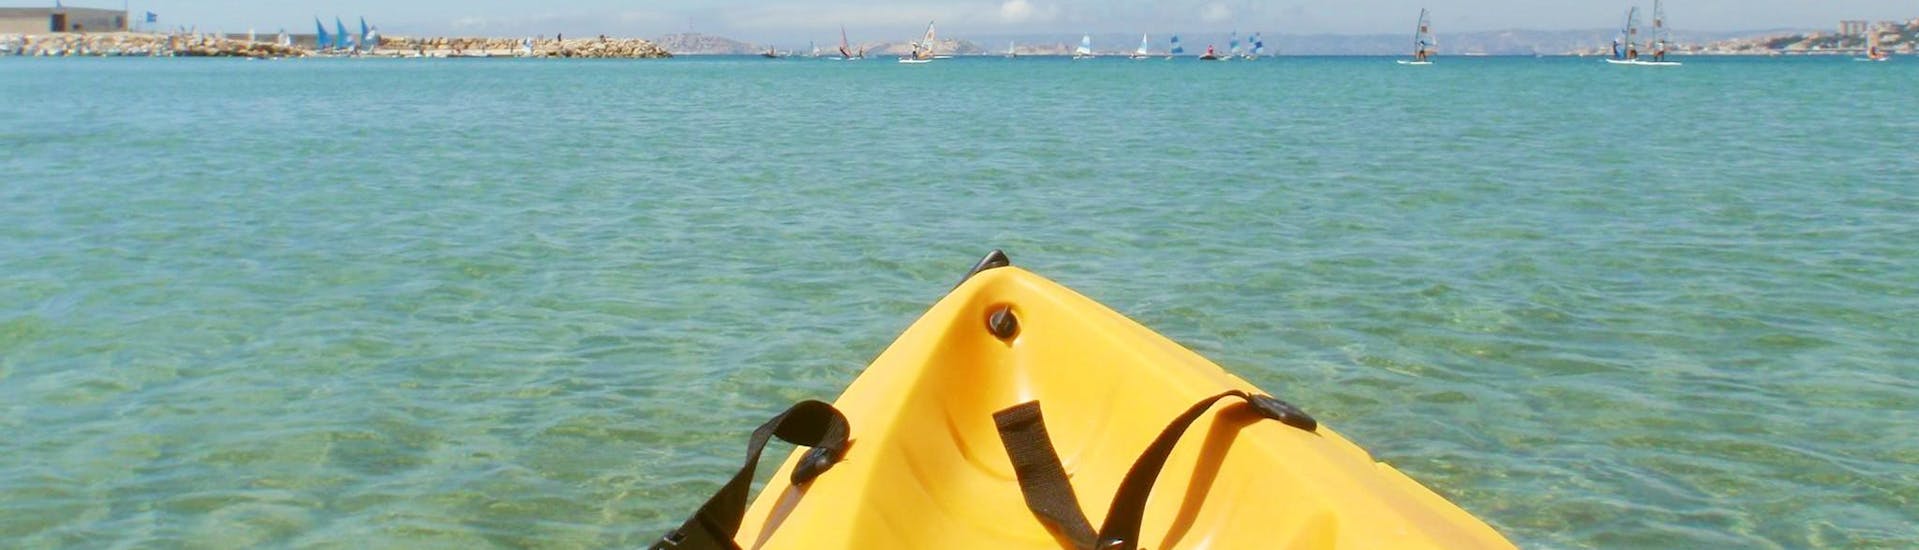 View from the kayak during the Sea Kayak Hire at the Pointe Rouge beach with 123 Kayak in Marseille.